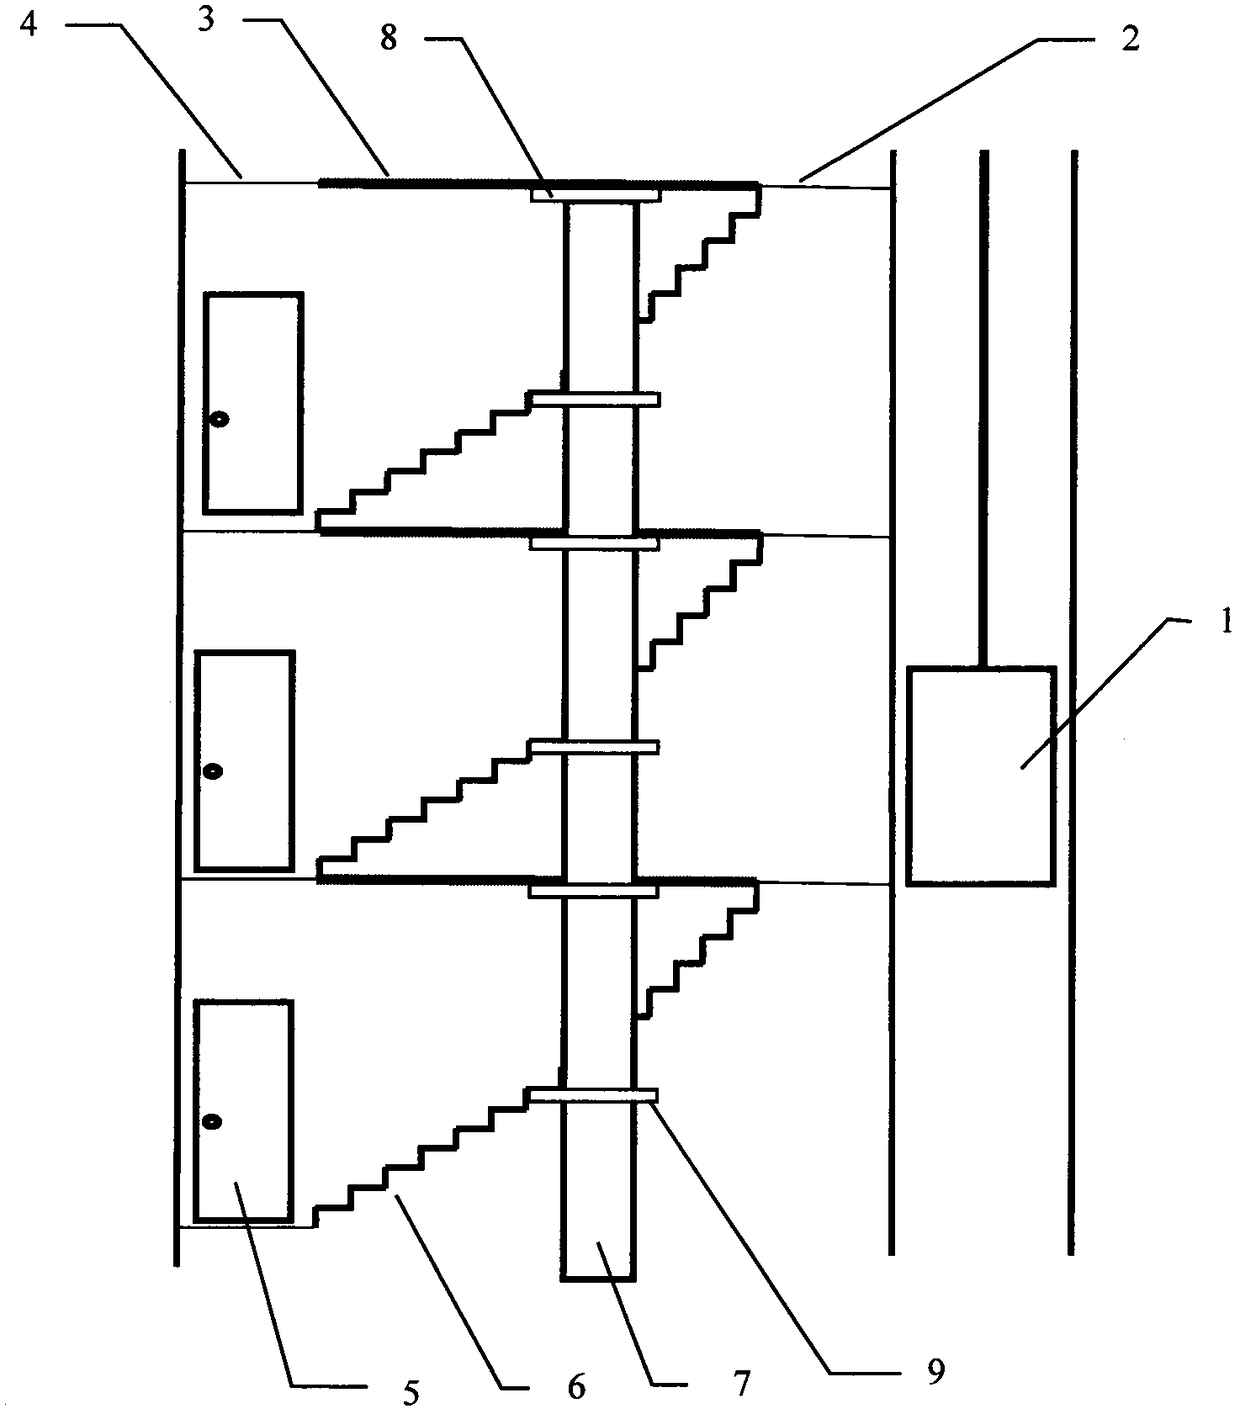 Novel middle-column-supported additionally-arranged elevator capable of directly reaching original gate of resident